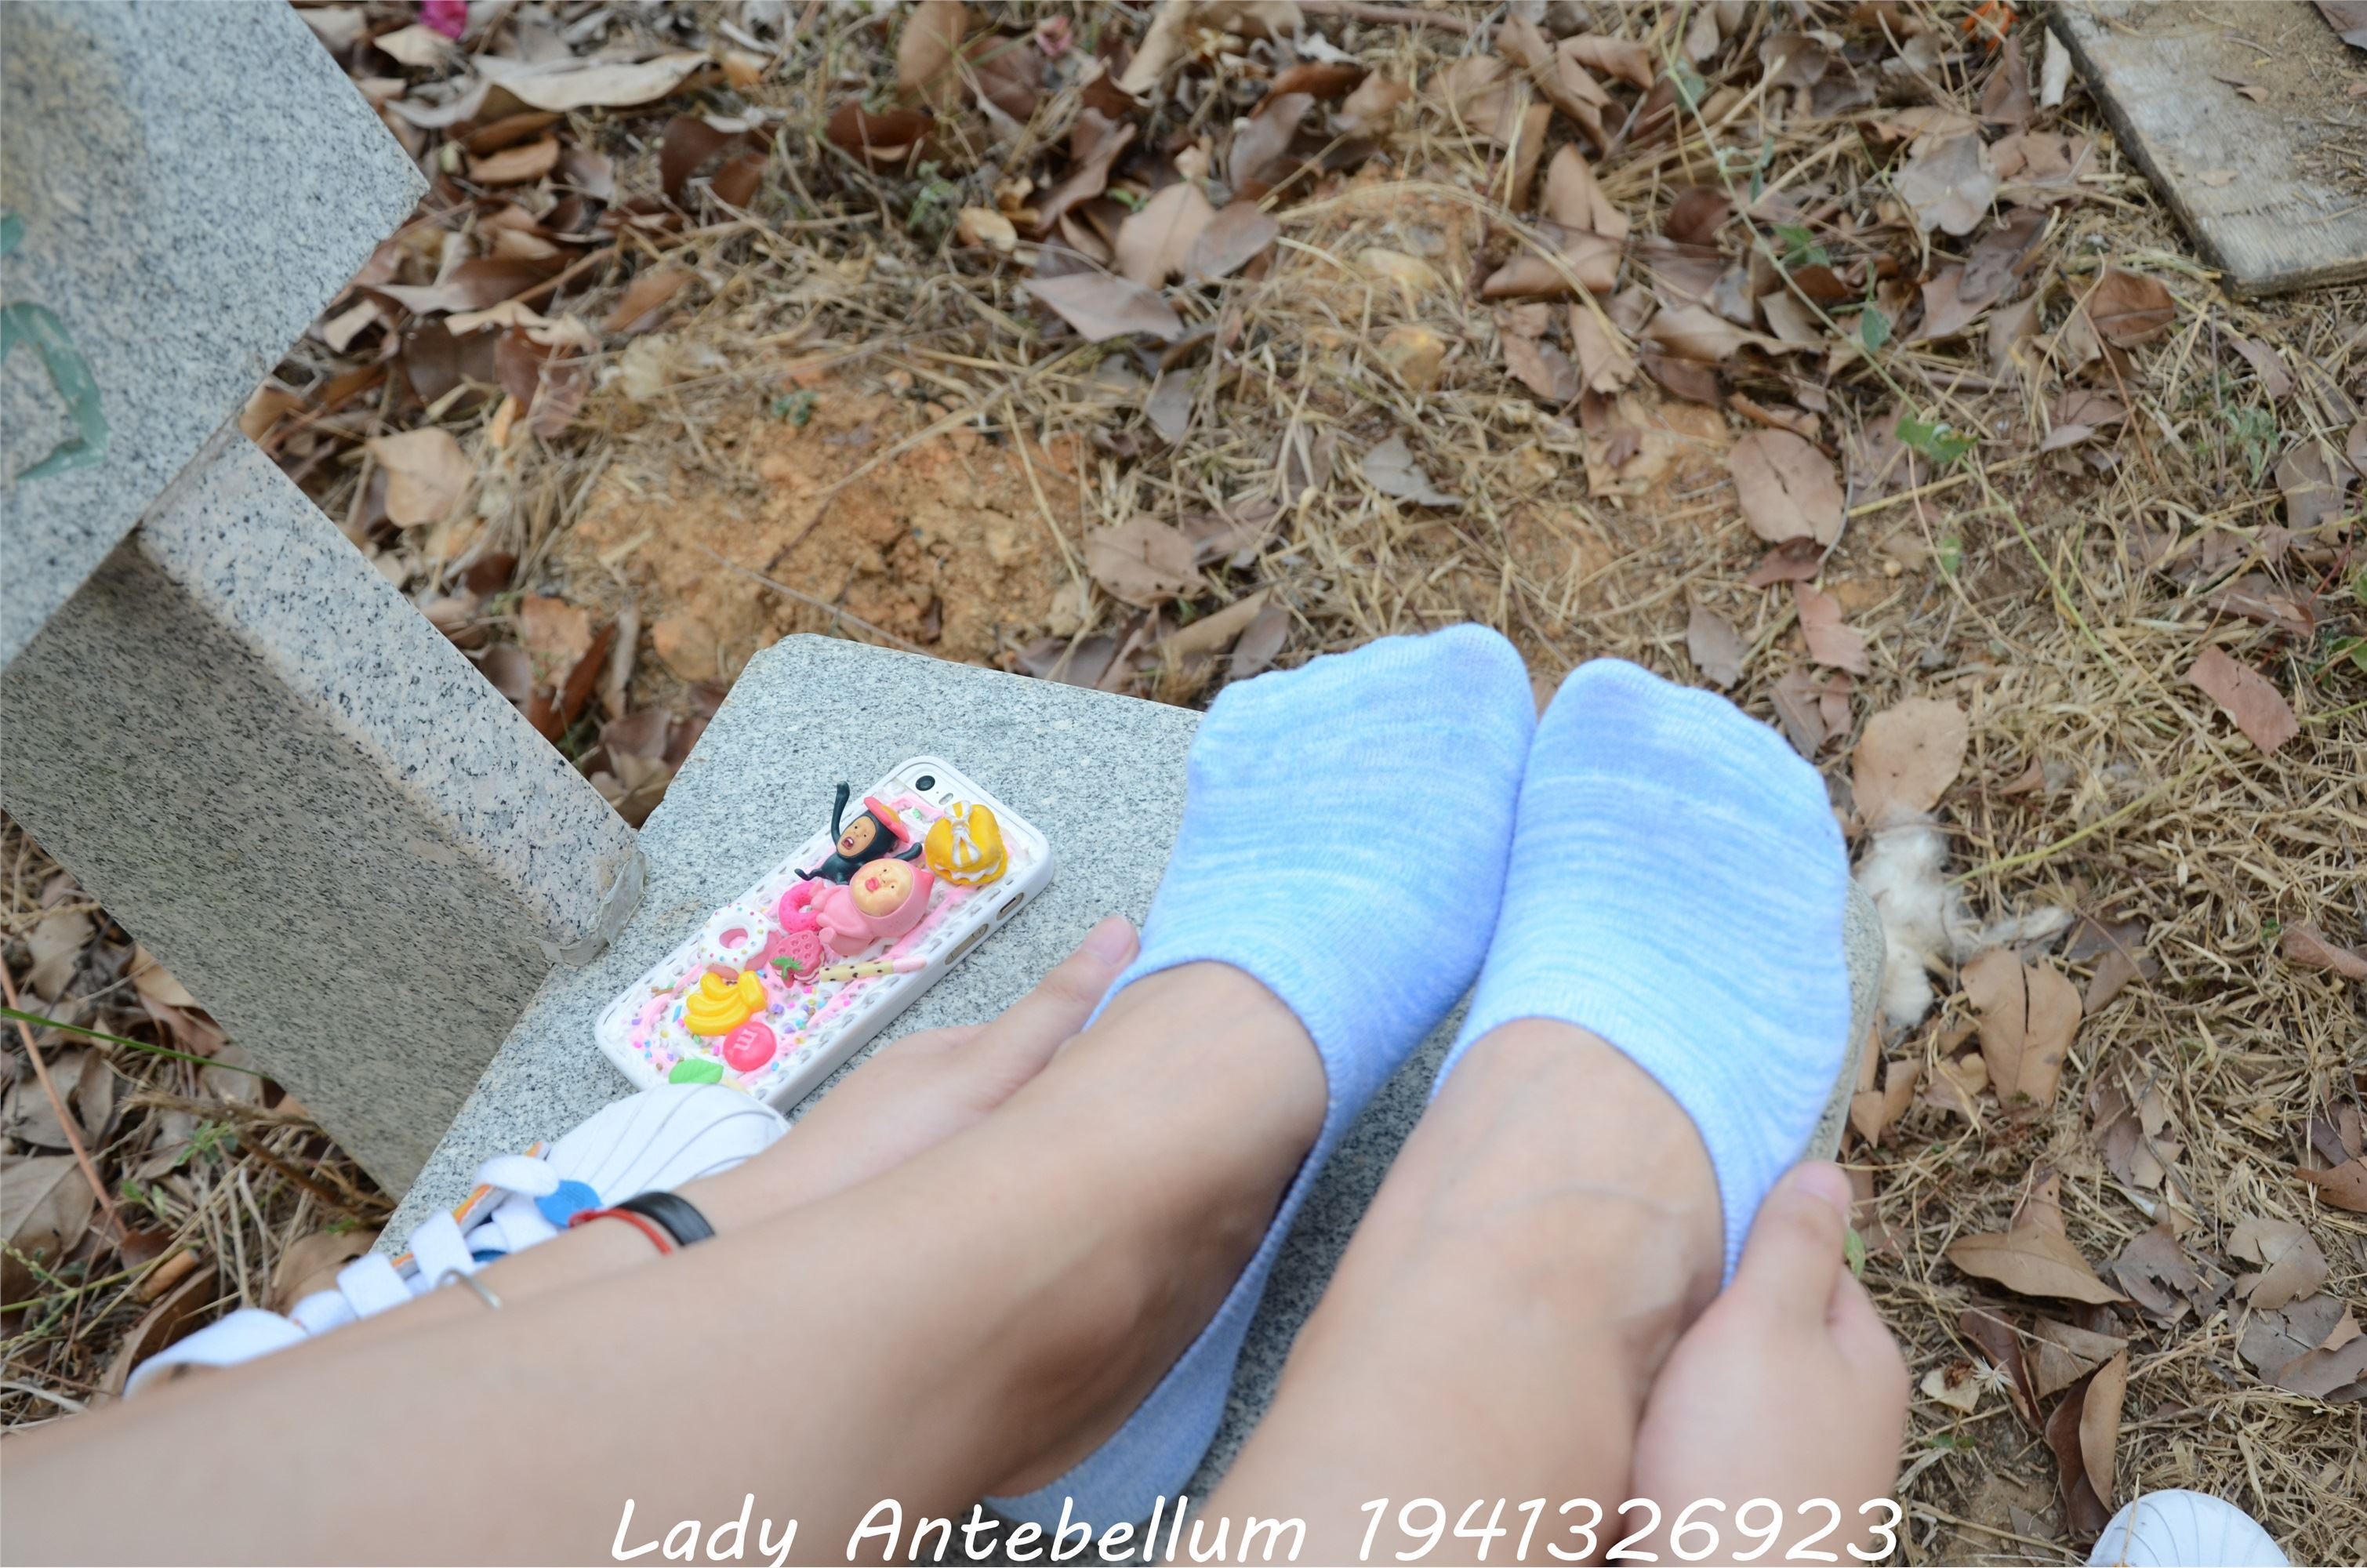 Goddess's feet and legs cotton stockings before the war 097